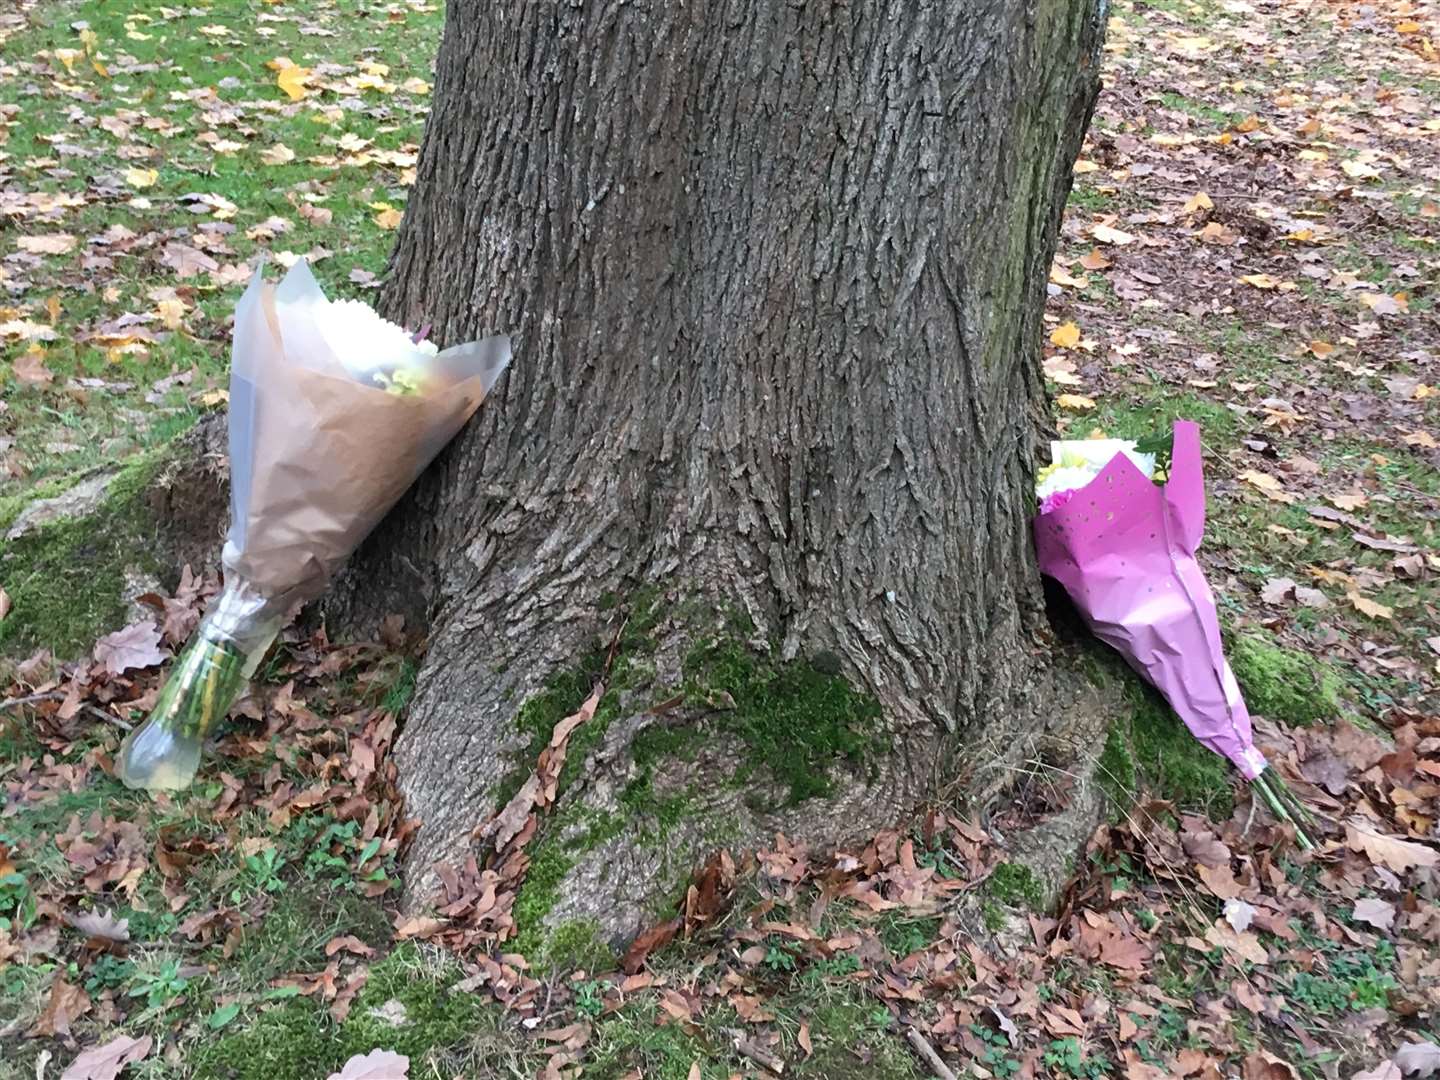 Floral tributes have been left near the house